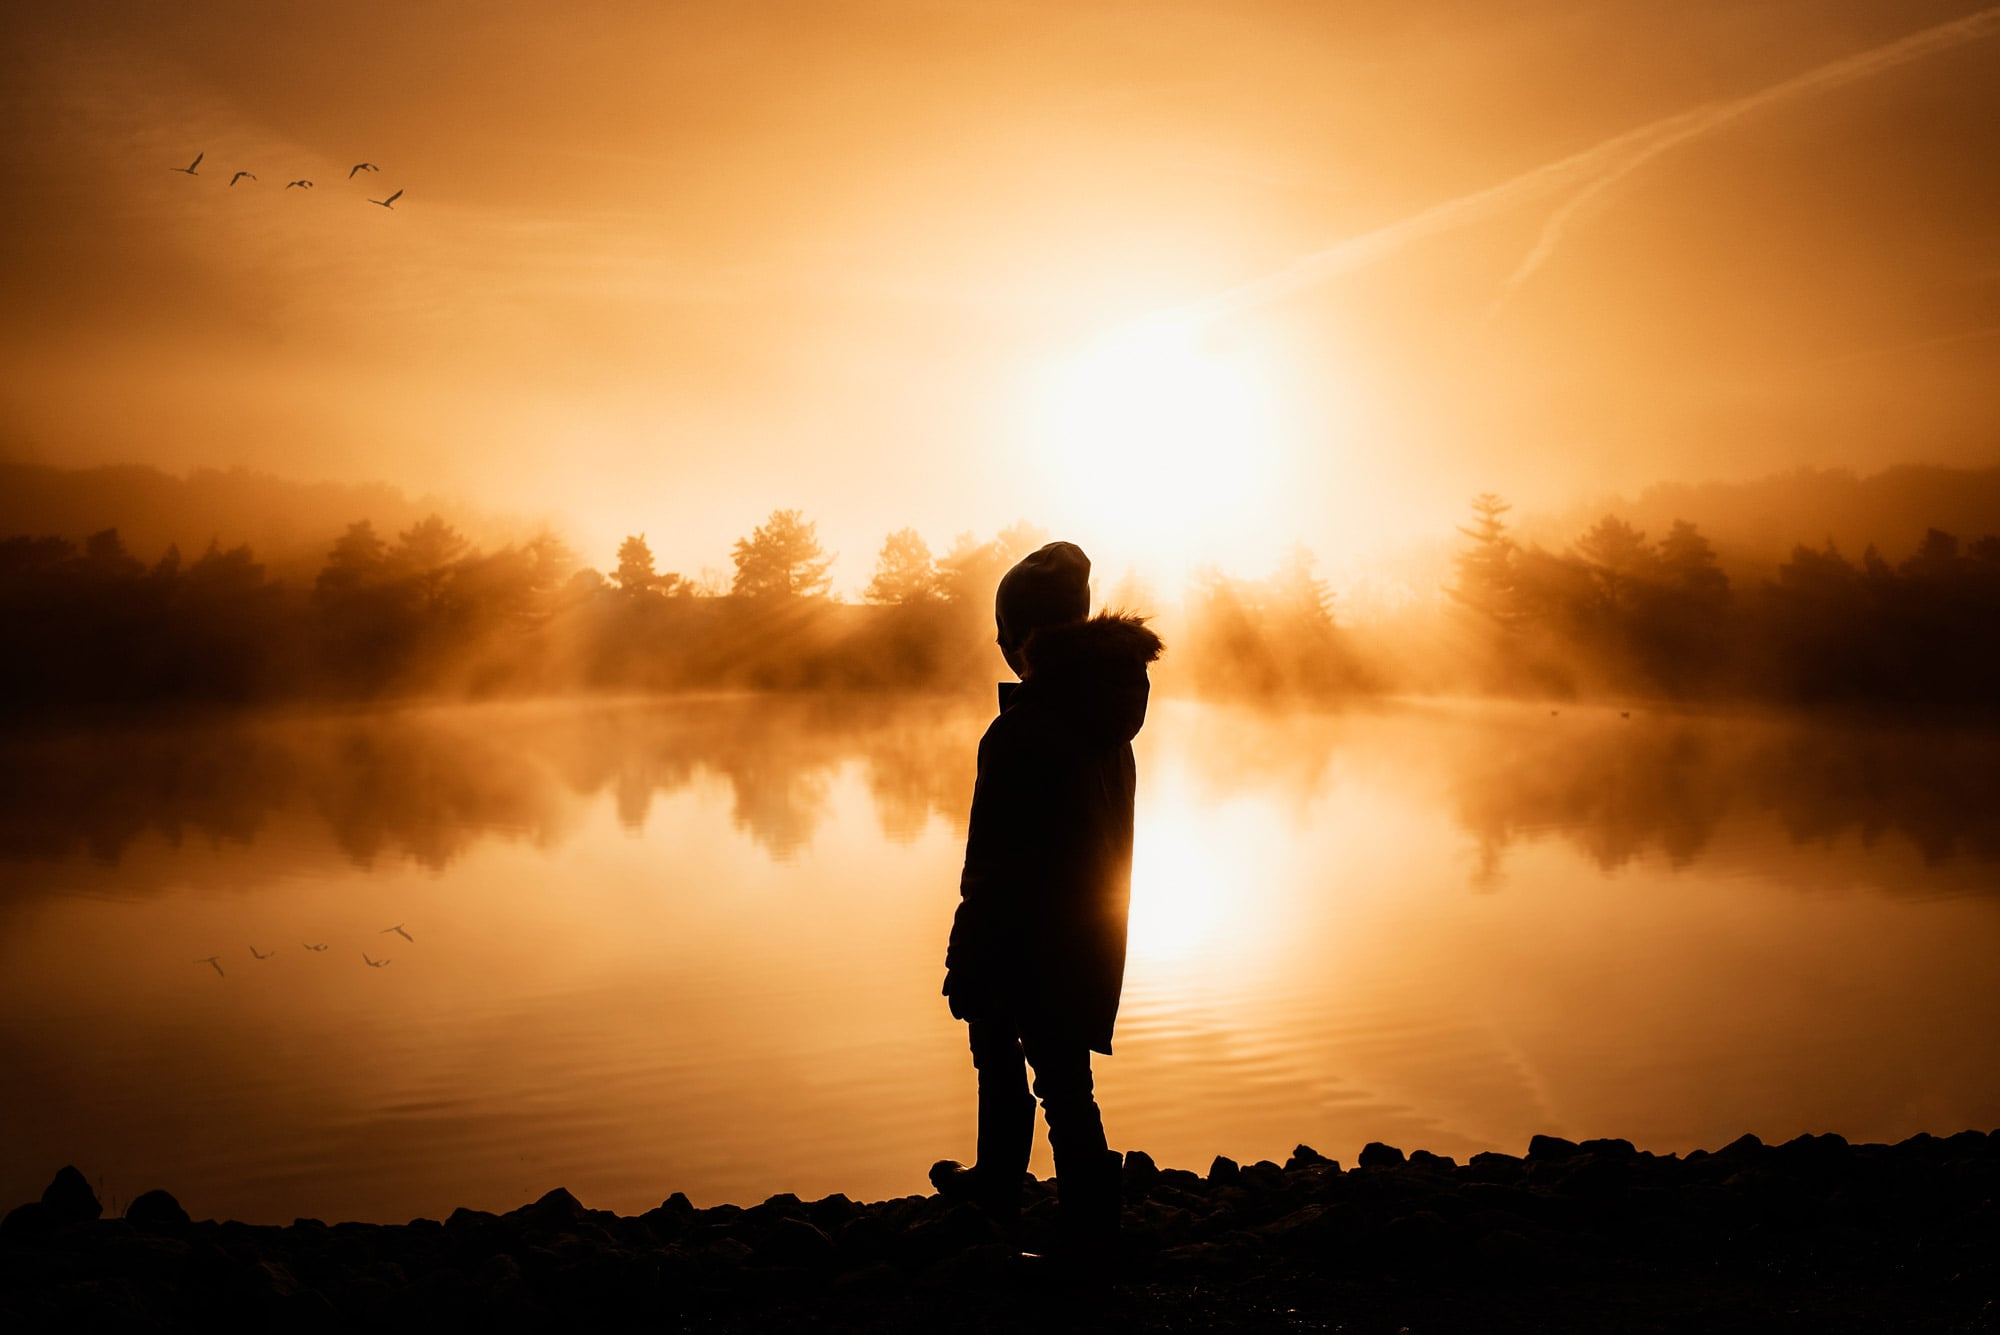 golden light during a foggy day with silhouette of a child